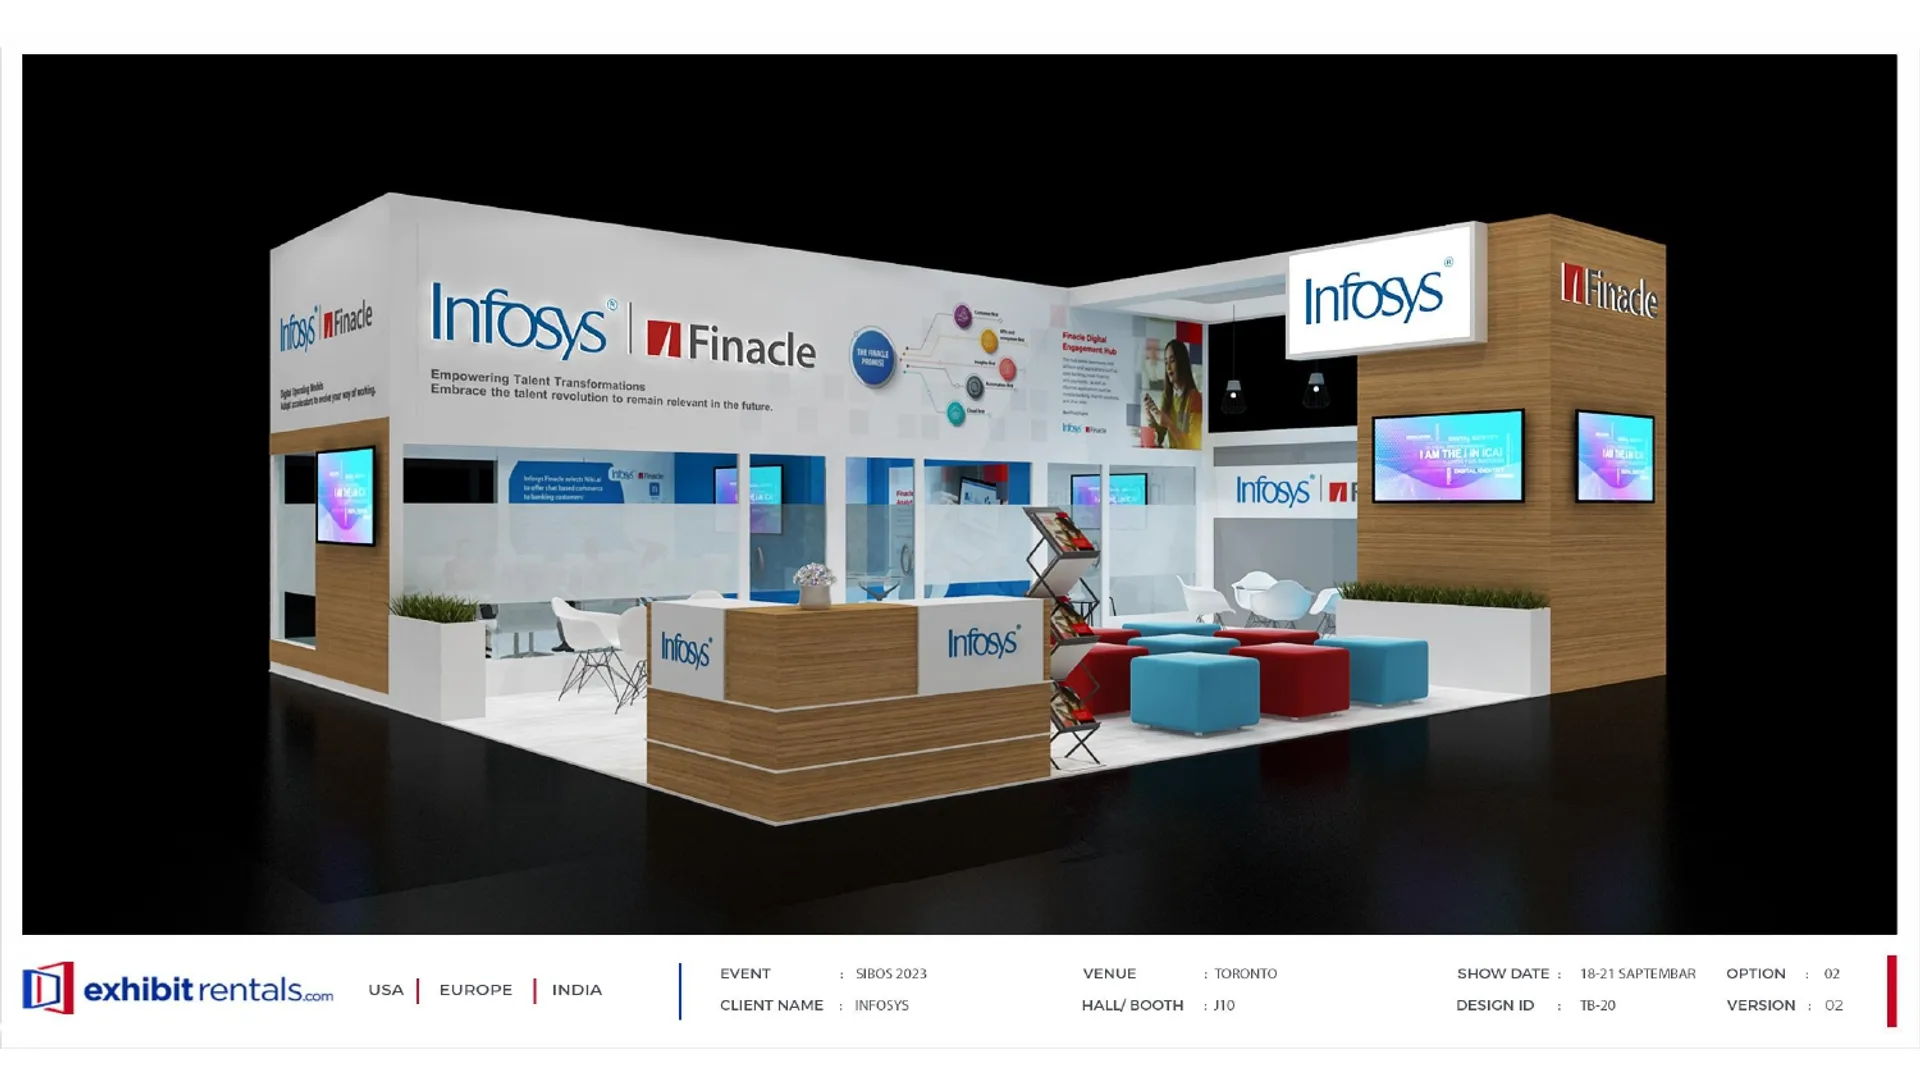 booth-design-projects/Exhibit-Rentals/2024-04-17-30x40-PENINSULA-Project-98/2.2 - Infosys - ER Design Presentation.pptx-14_page-0001-kcavv4.jpg